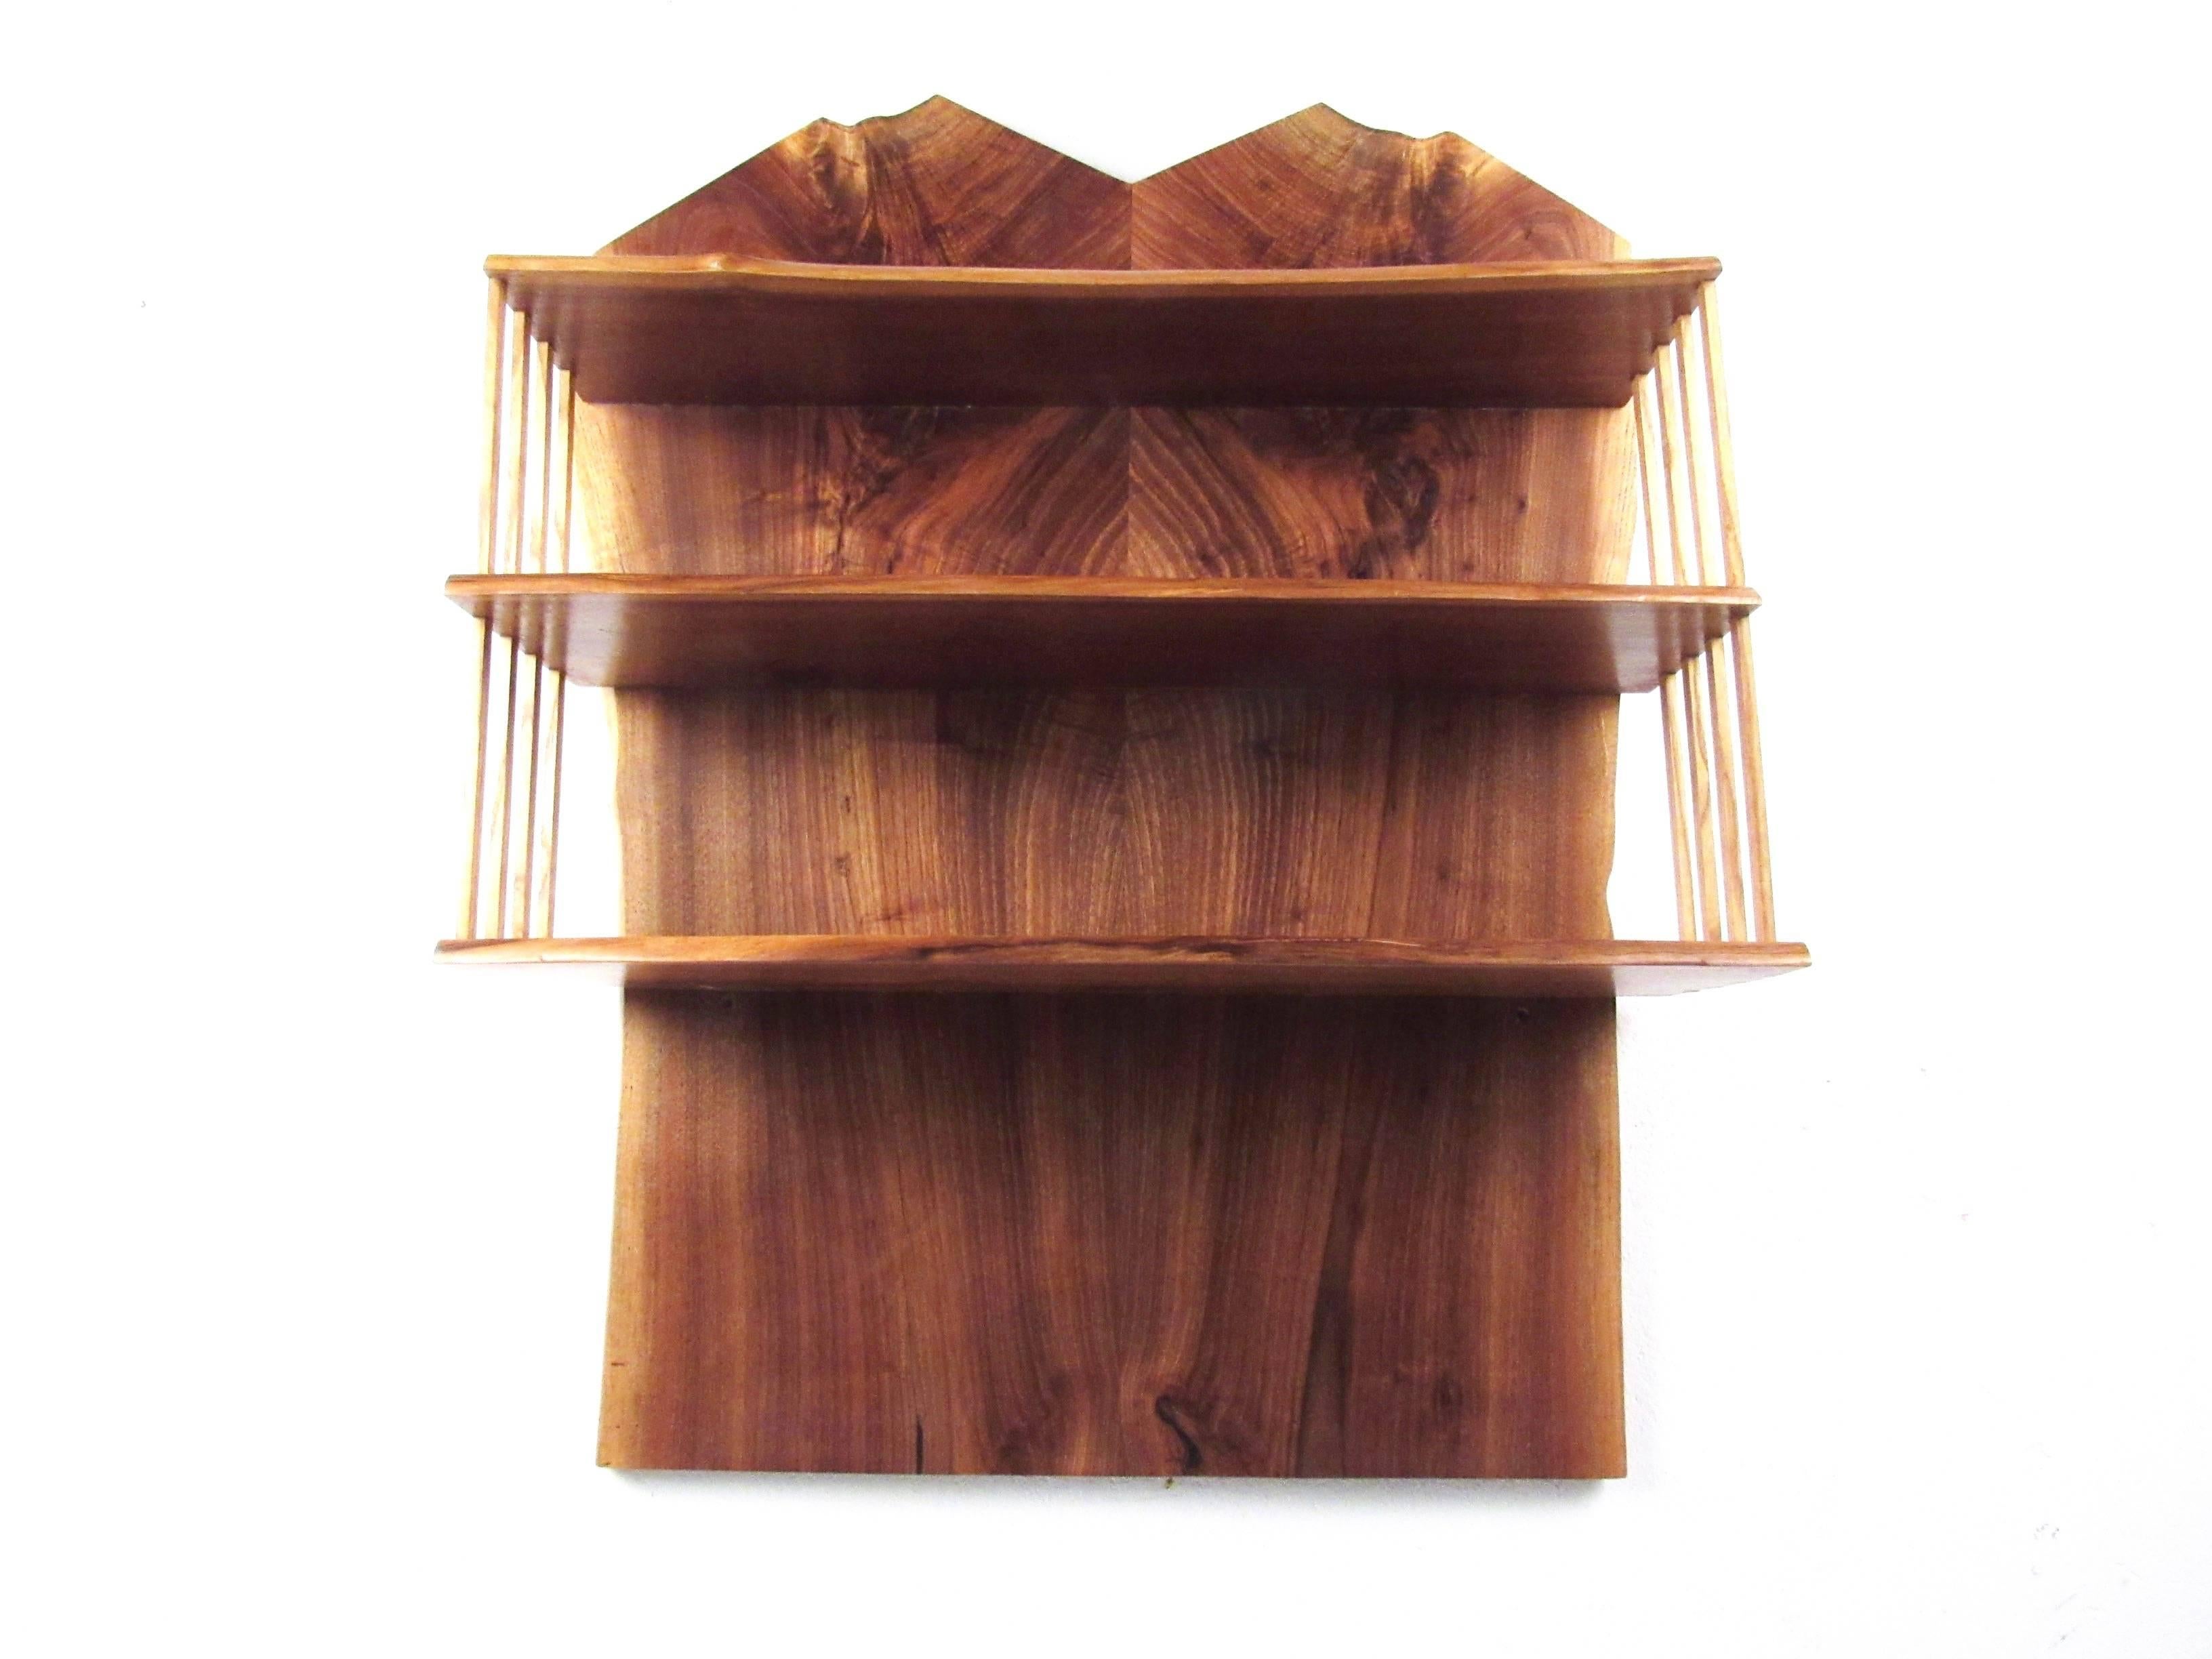 This impressive handmade wall shelf features rich hardwood construction with beautiful wood grain and rustic live edge design. Three shelves for ample storage, this George Nakashima style shelf makes an eye-catching display piece for home or